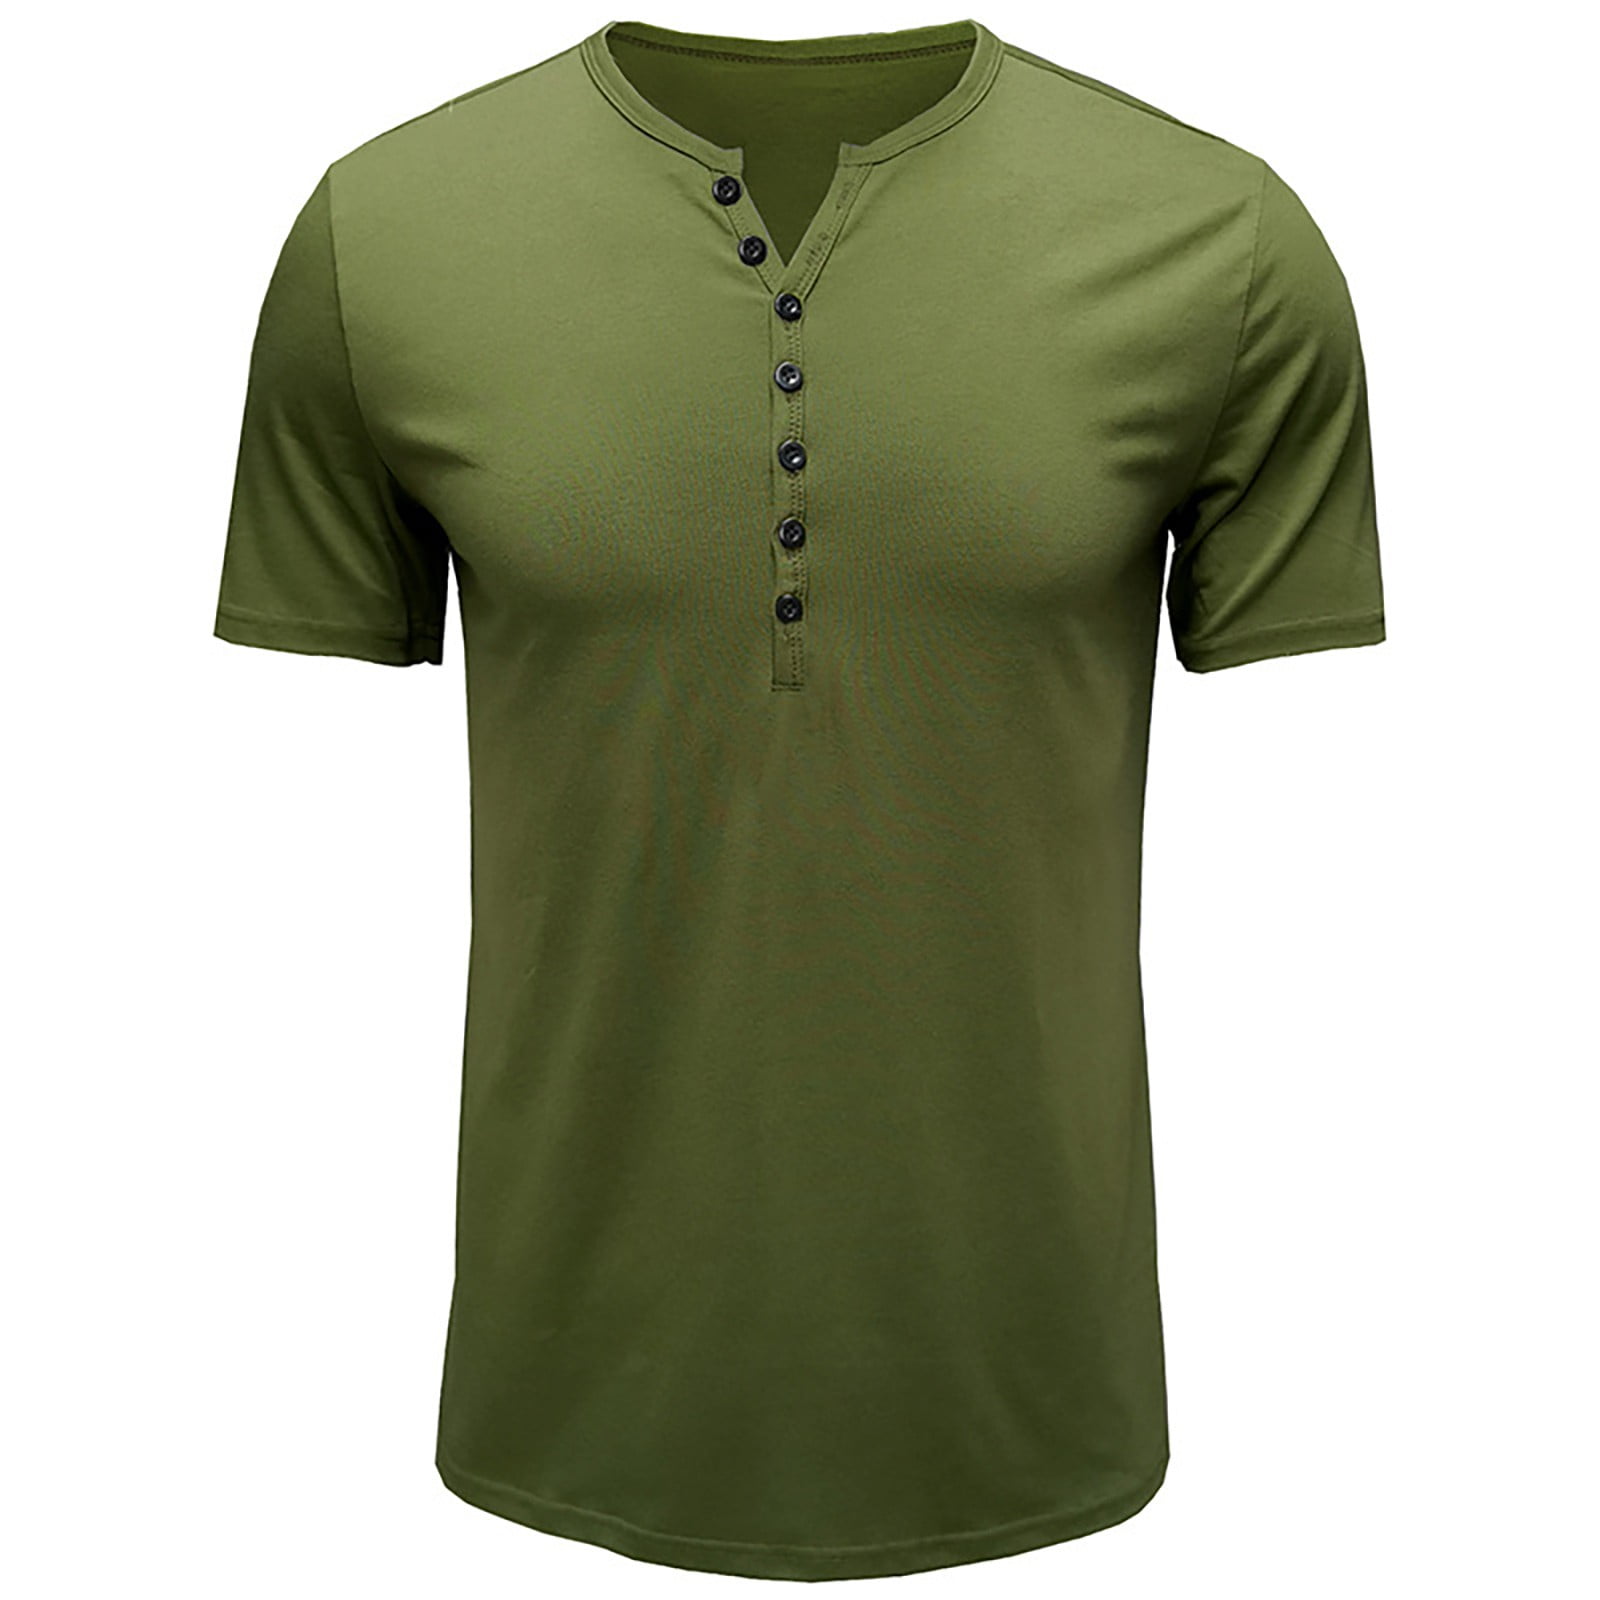 Huk Fishing Shirts For Men Green Tops for Men Men's Plus Size Shirts Solid  Color Short Sleeve T-Shirts Button-Up Shirts Cotton tshirts for Men  Button-Down Shirts,Green,S 